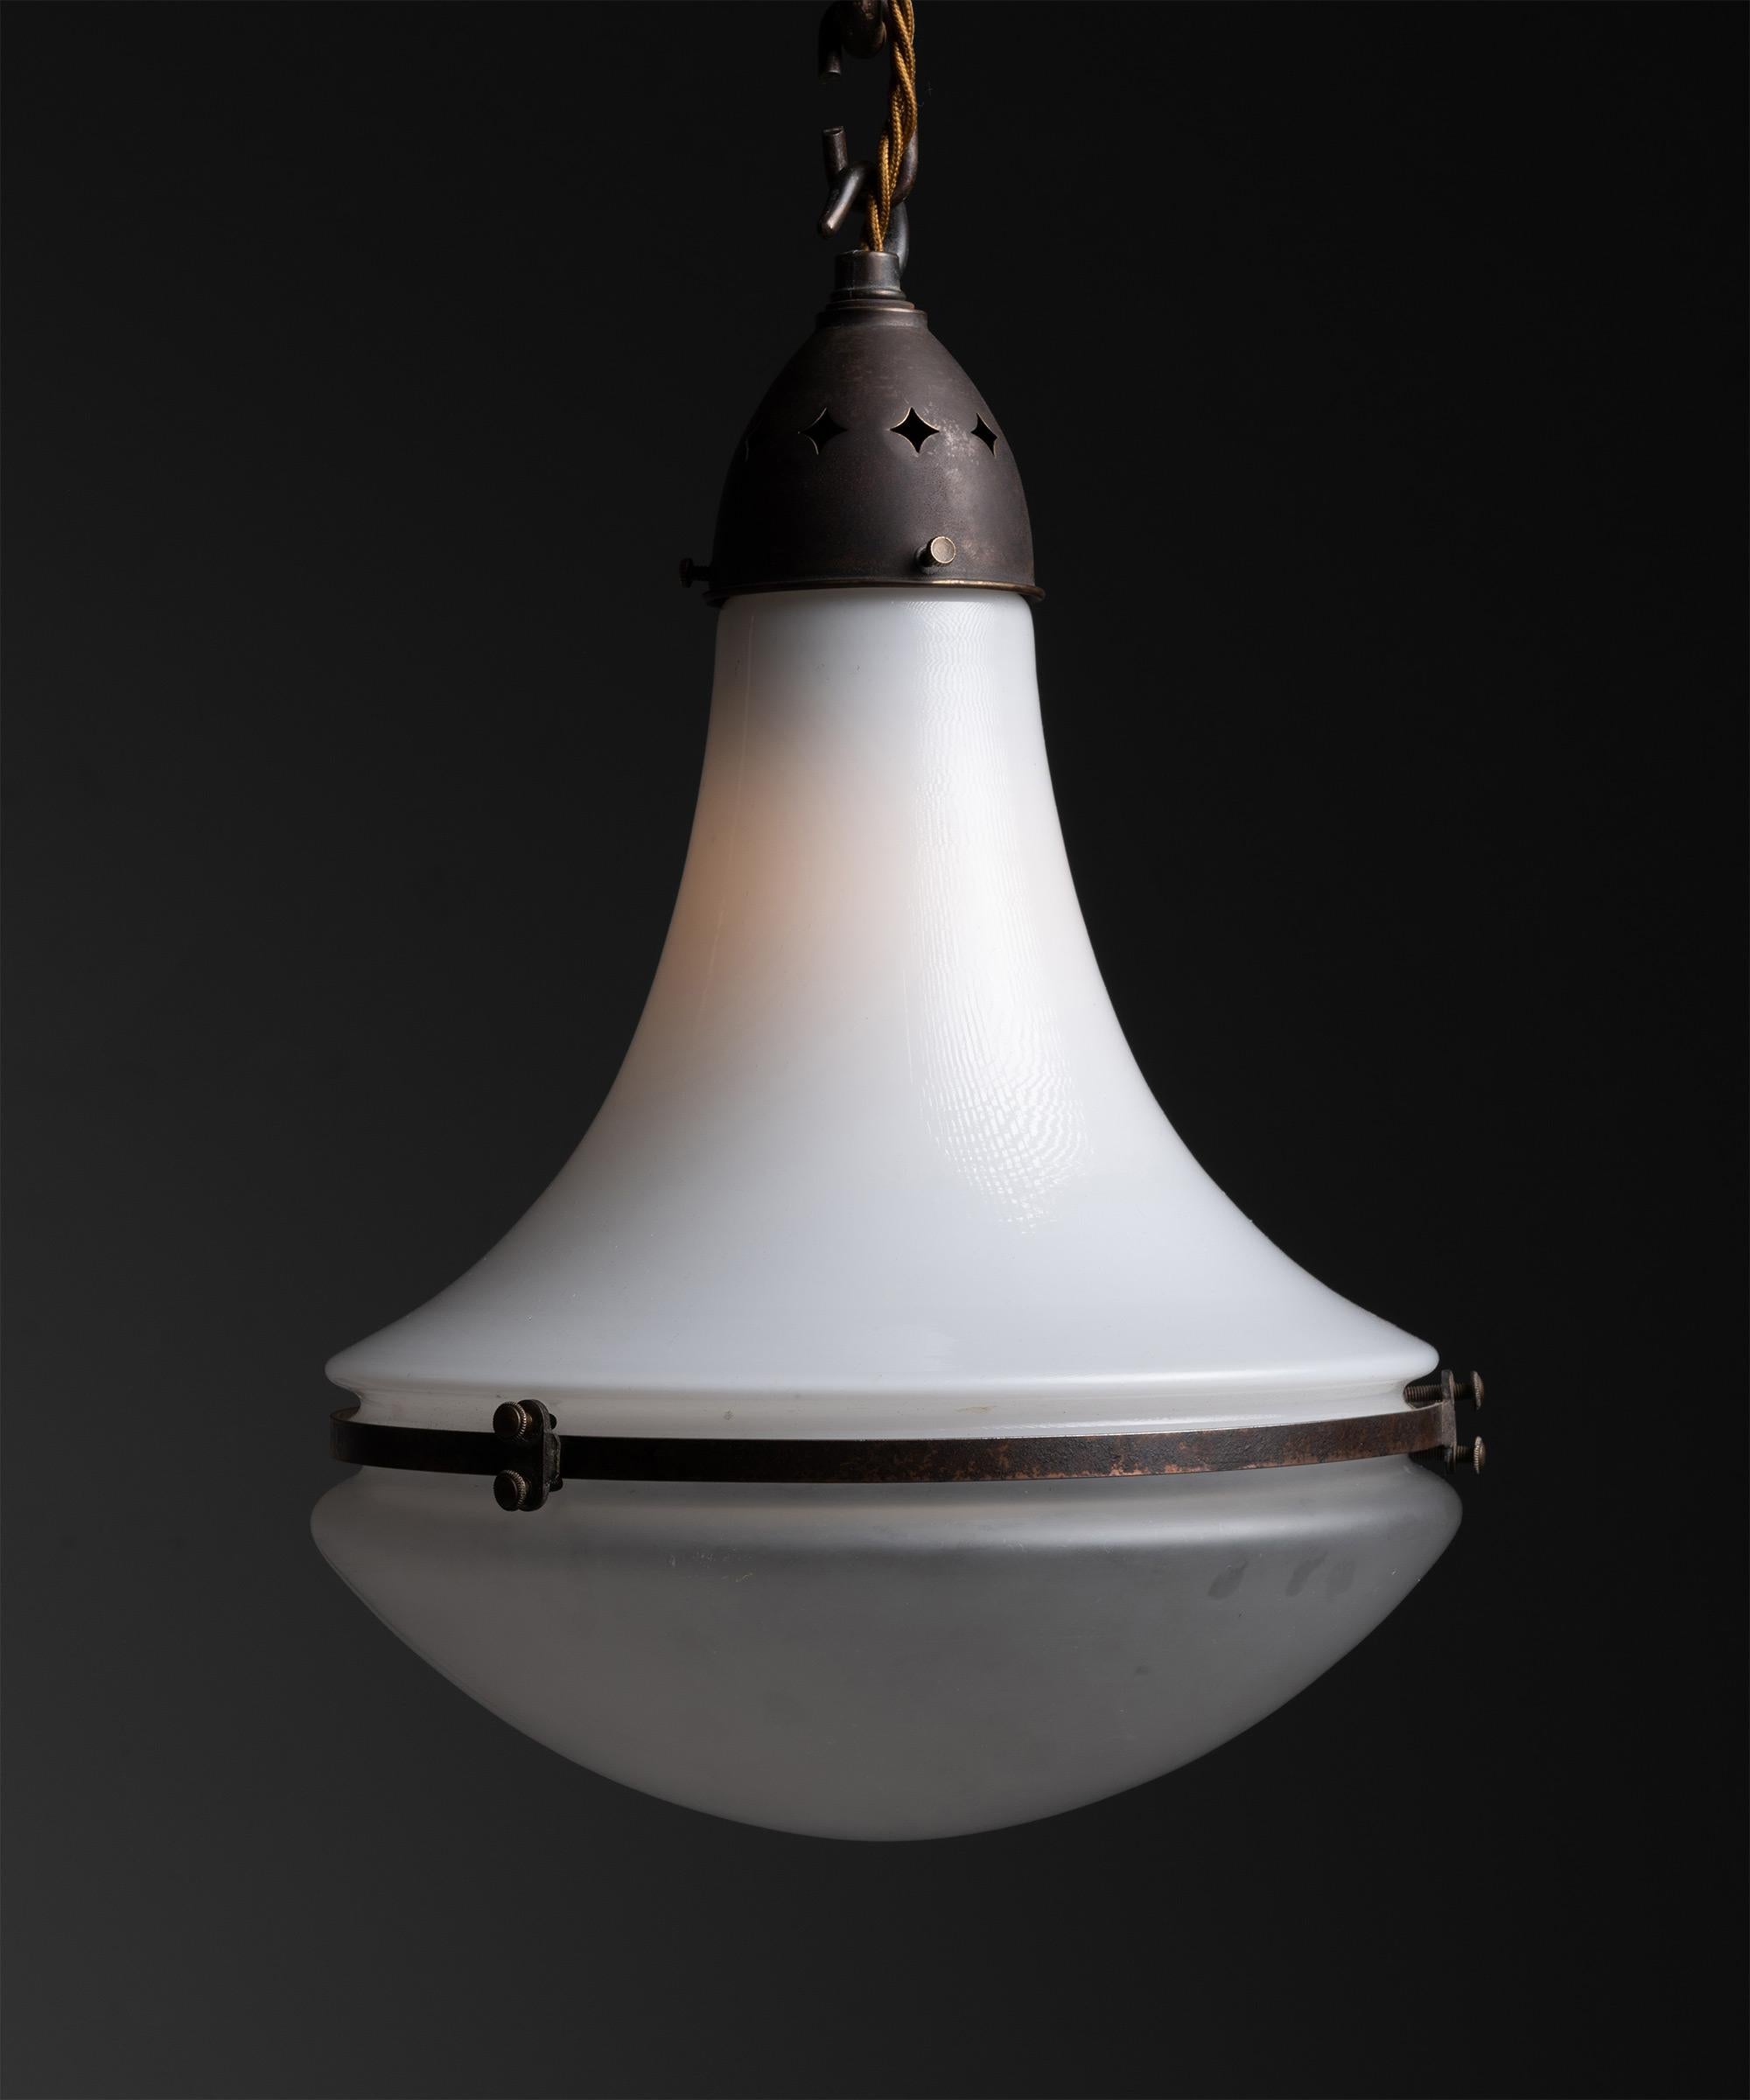 Luzette pendant by Peter Behrens, Germany circa 1930.

With frosted glass top and opaline glass bottom, secured with copper fitter and brace. Manufactured by AEG Siemens with manufacturer's mark.

Measures: 10